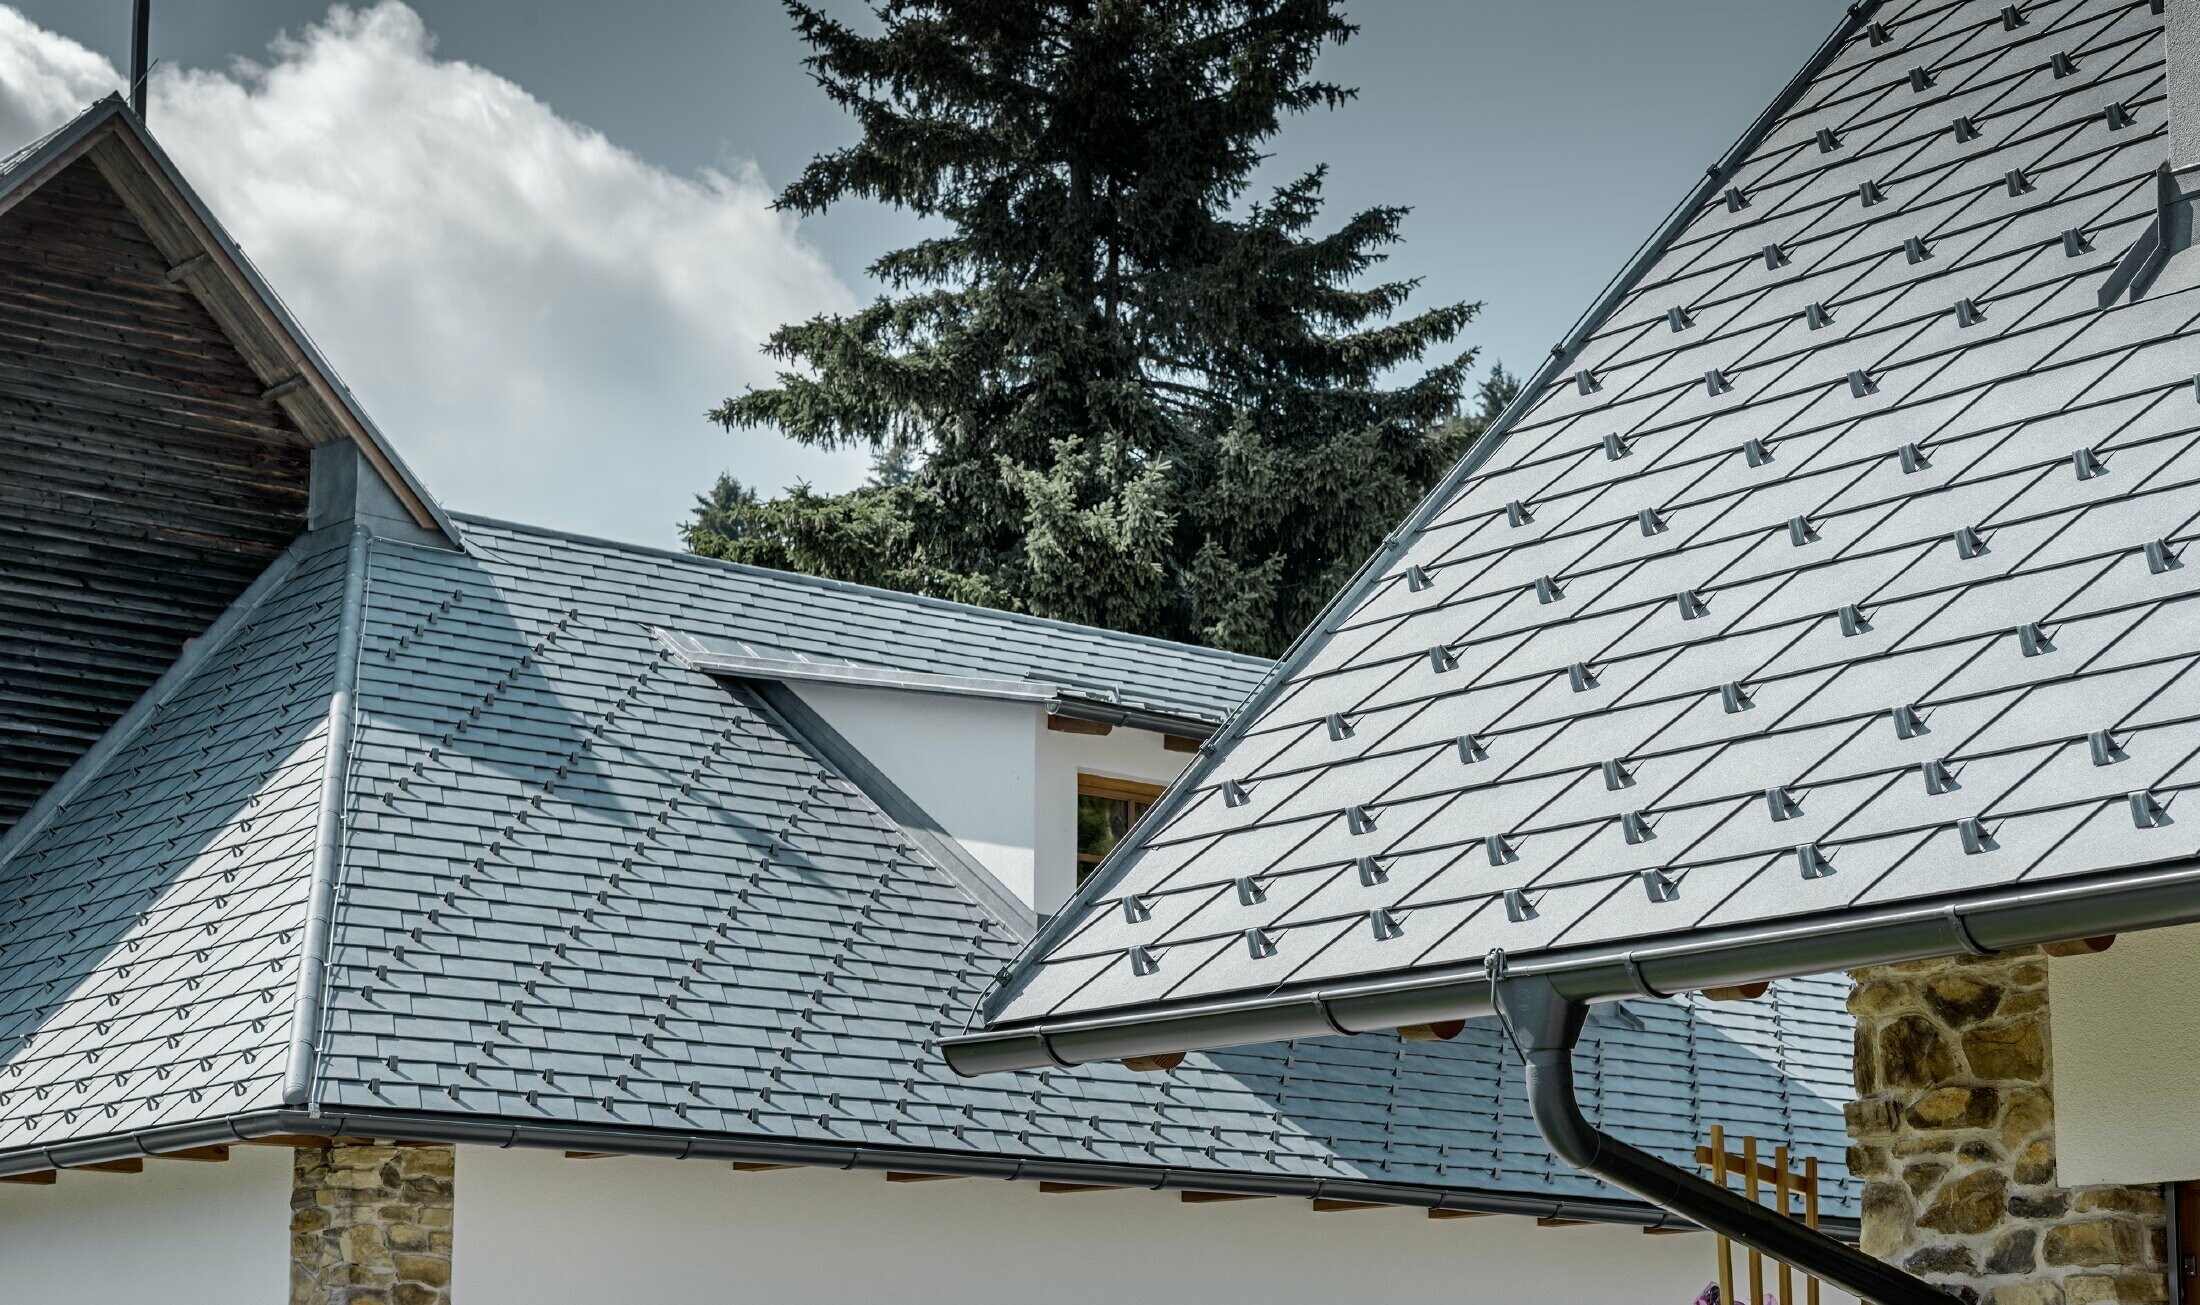 Close up of a PREFA aluminium roof cover; roof shingles in stone grey with the PREFA aluminium gutter in anthracite; an eyebrow dormer with standing seam roof can be seen in the background. The façade is white with integrated stone elements.